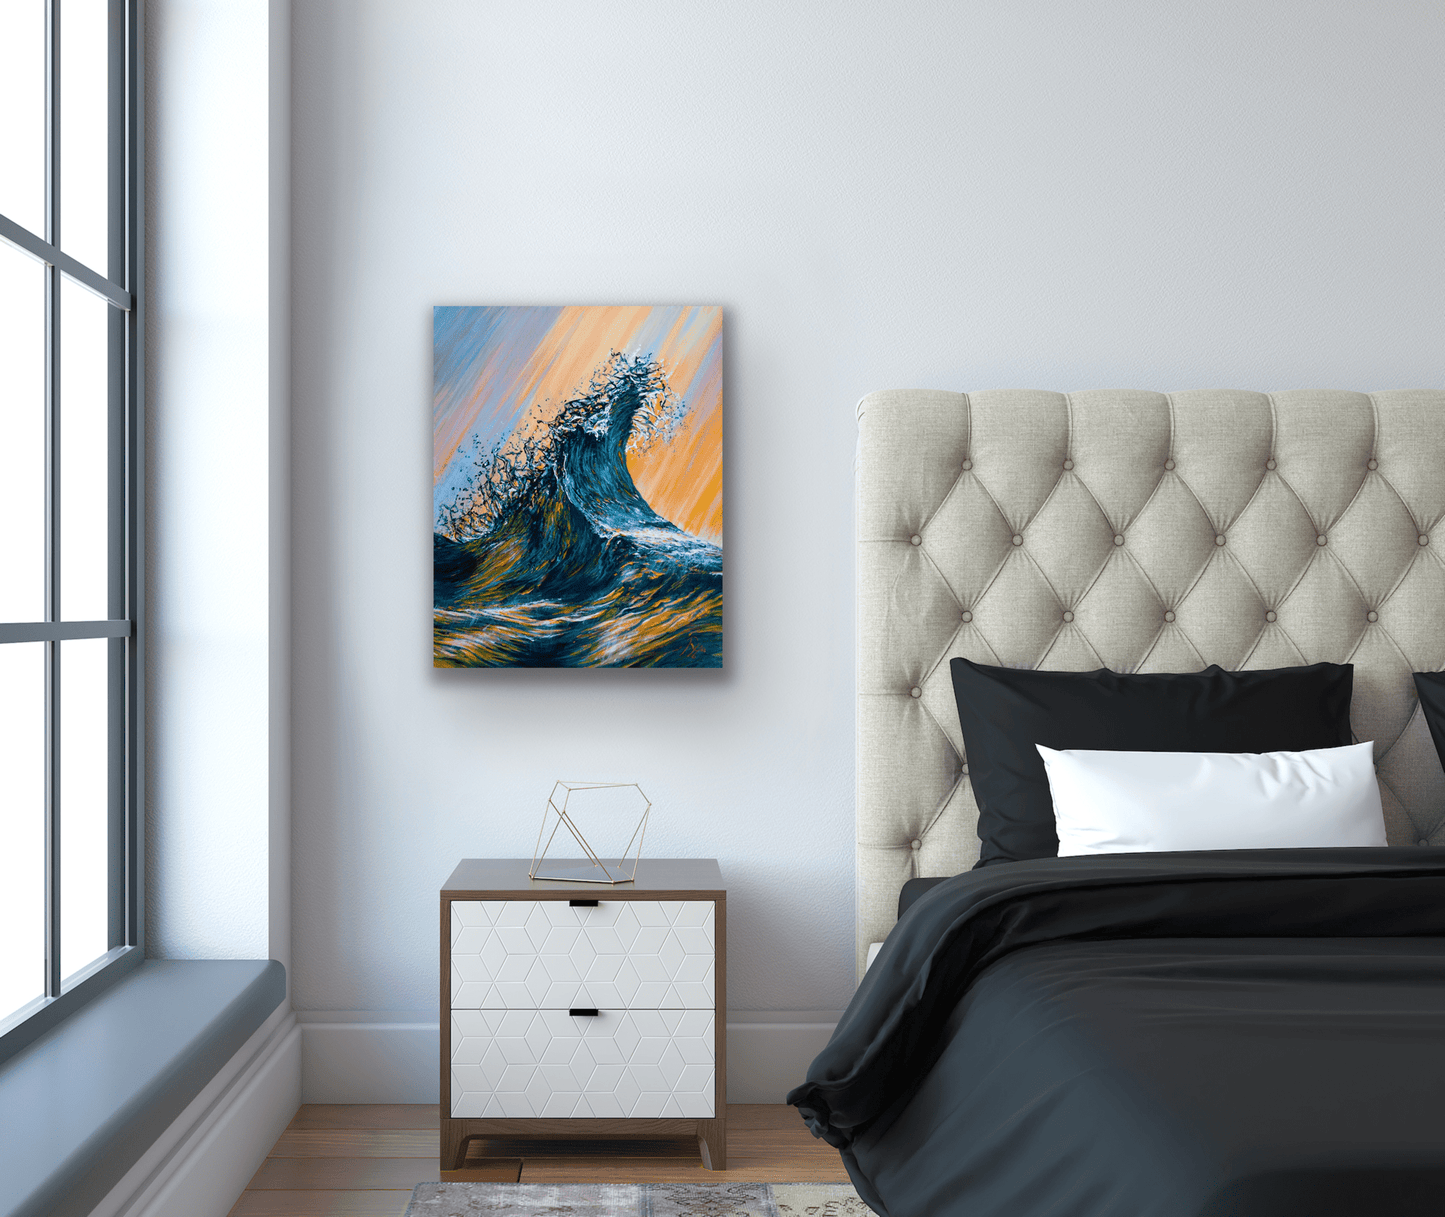 This original painting will look great in your bedroom.